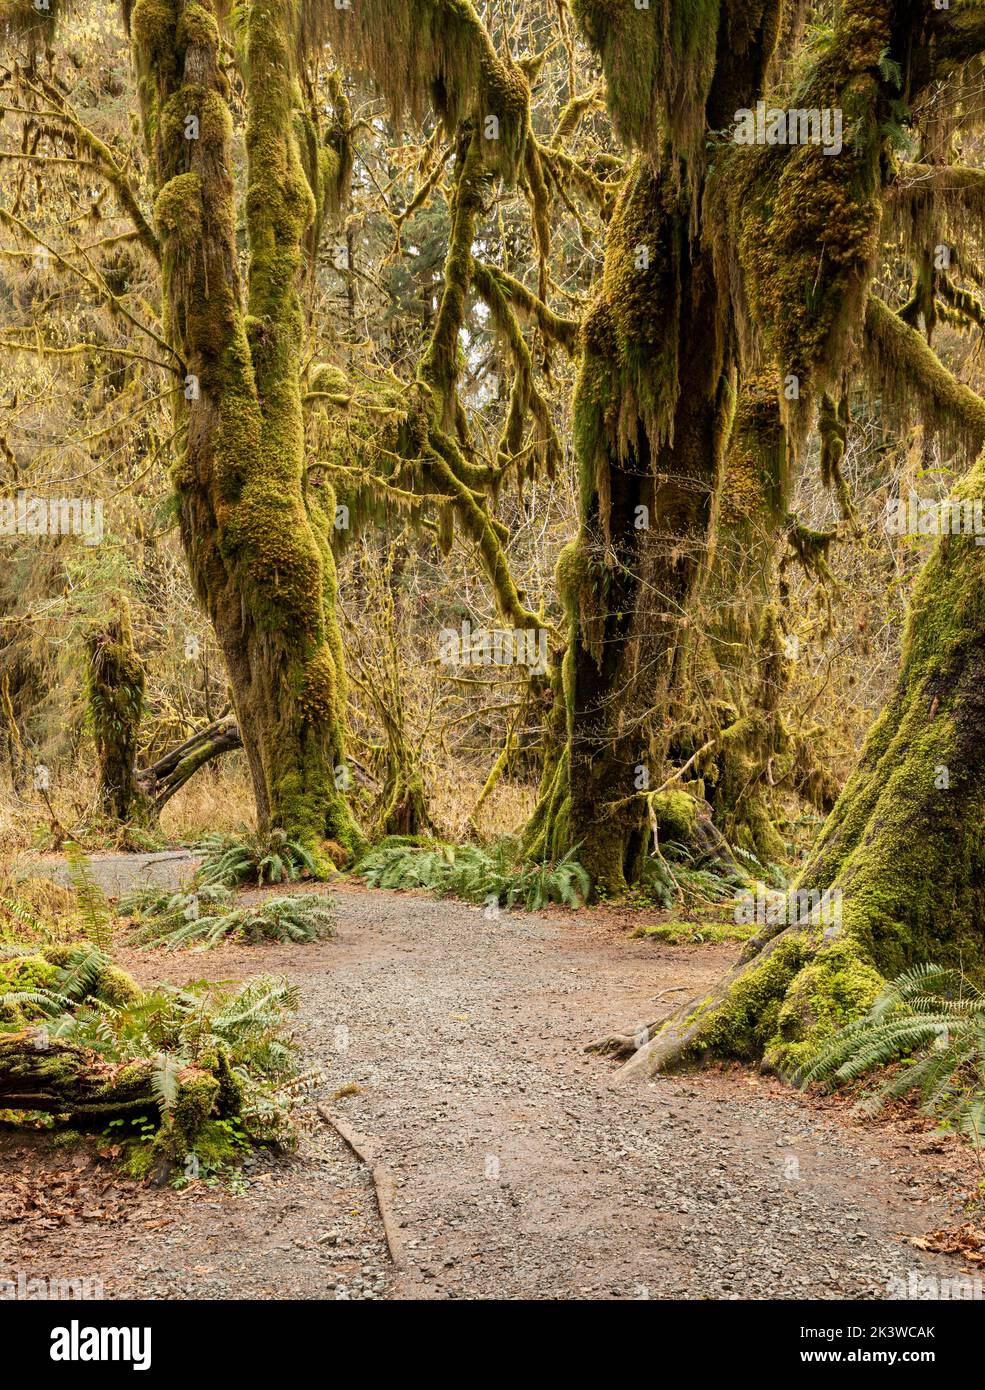 WA22102-00...WASHINGTON - Maple trees covered with moss  in the Hall of Mosses, part of the Hoh Rain Forest , In Olympic National Park. Stock Photo